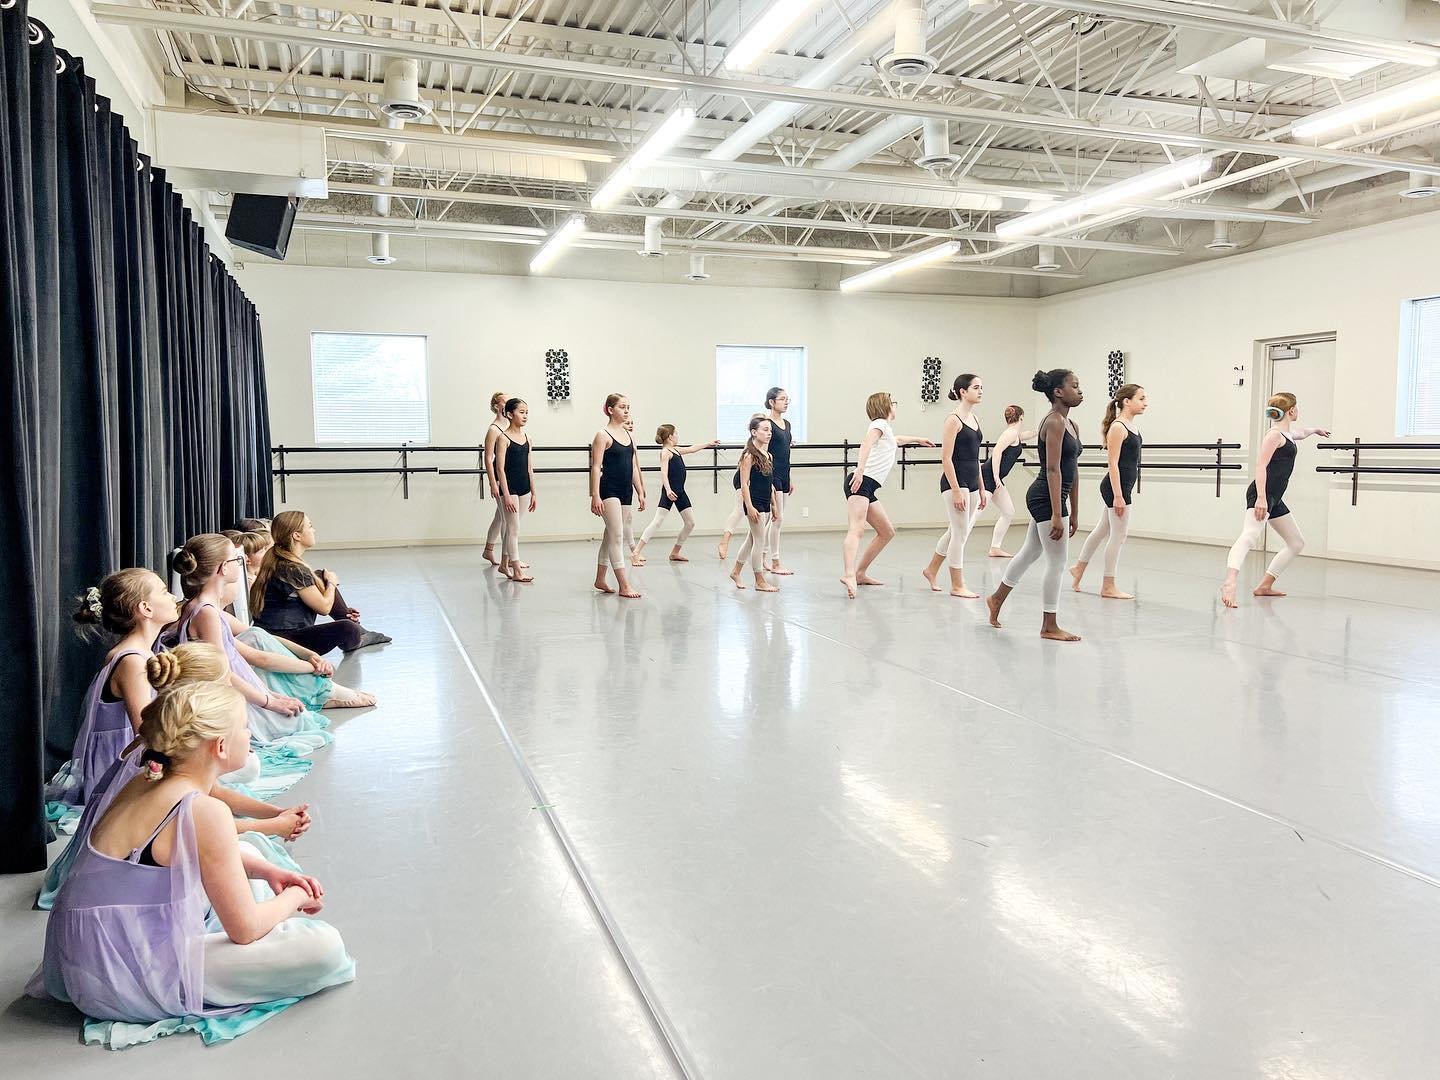 2 WEEKS TODAY 🤩

We are only 2 weeks  away from our 33rd Annual Year End Recital and Sessional Showcase! Our dancers are working hard on their class choreography, trying on costumes, and preparing to hit the stage! What an exciting time✨

🎟️ RECITA